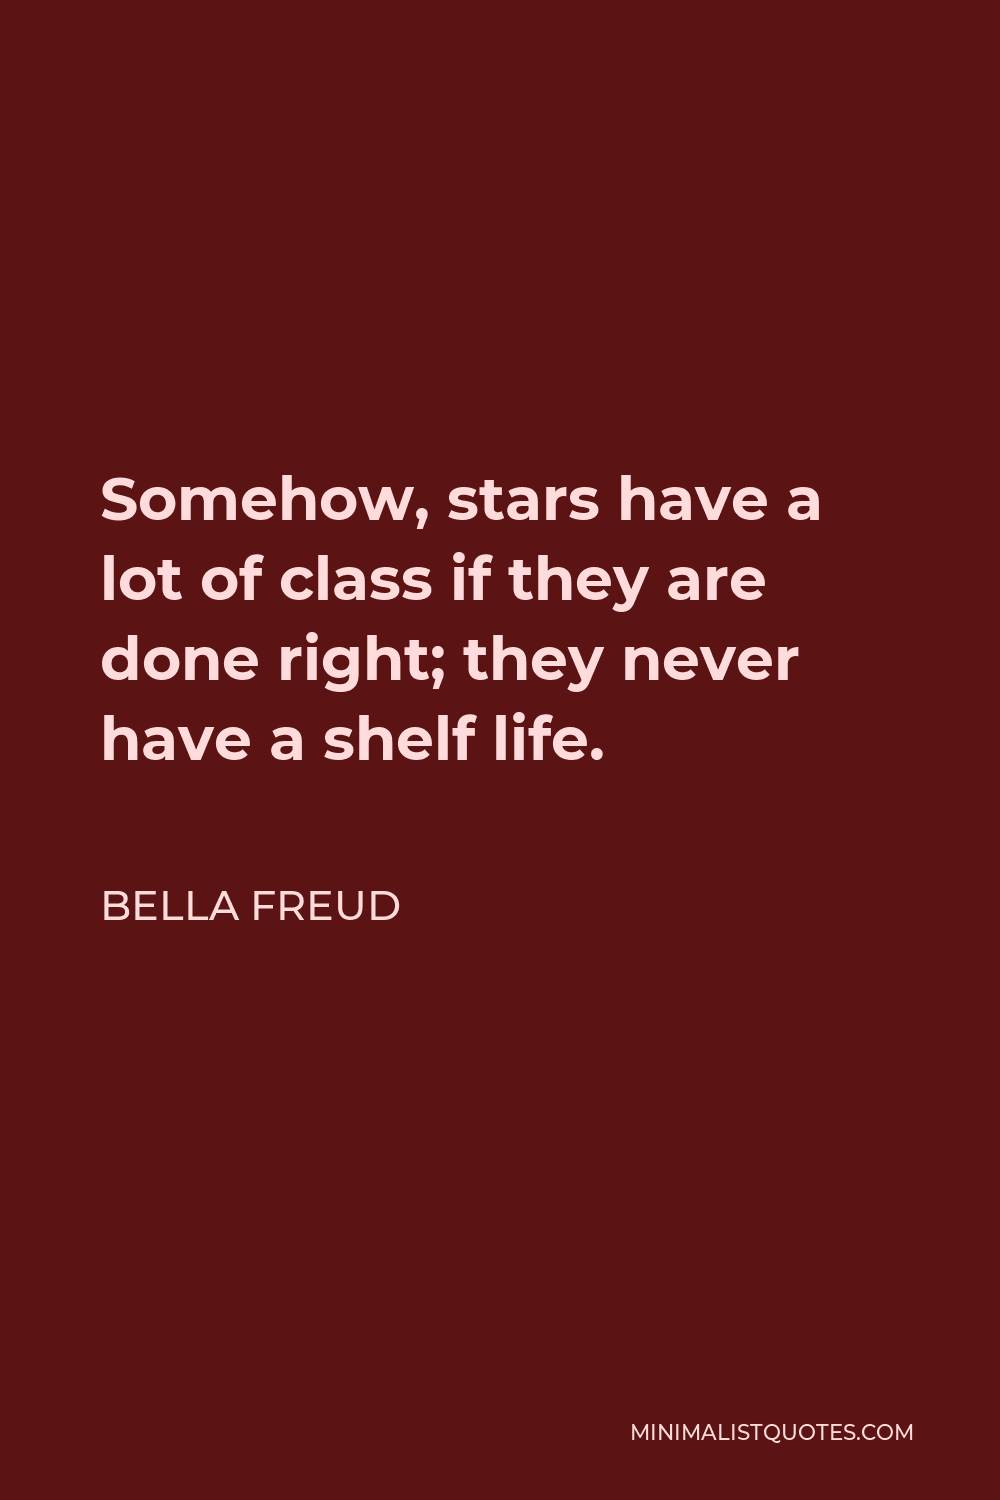 Bella Freud Quote - Somehow, stars have a lot of class if they are done right; they never have a shelf life.